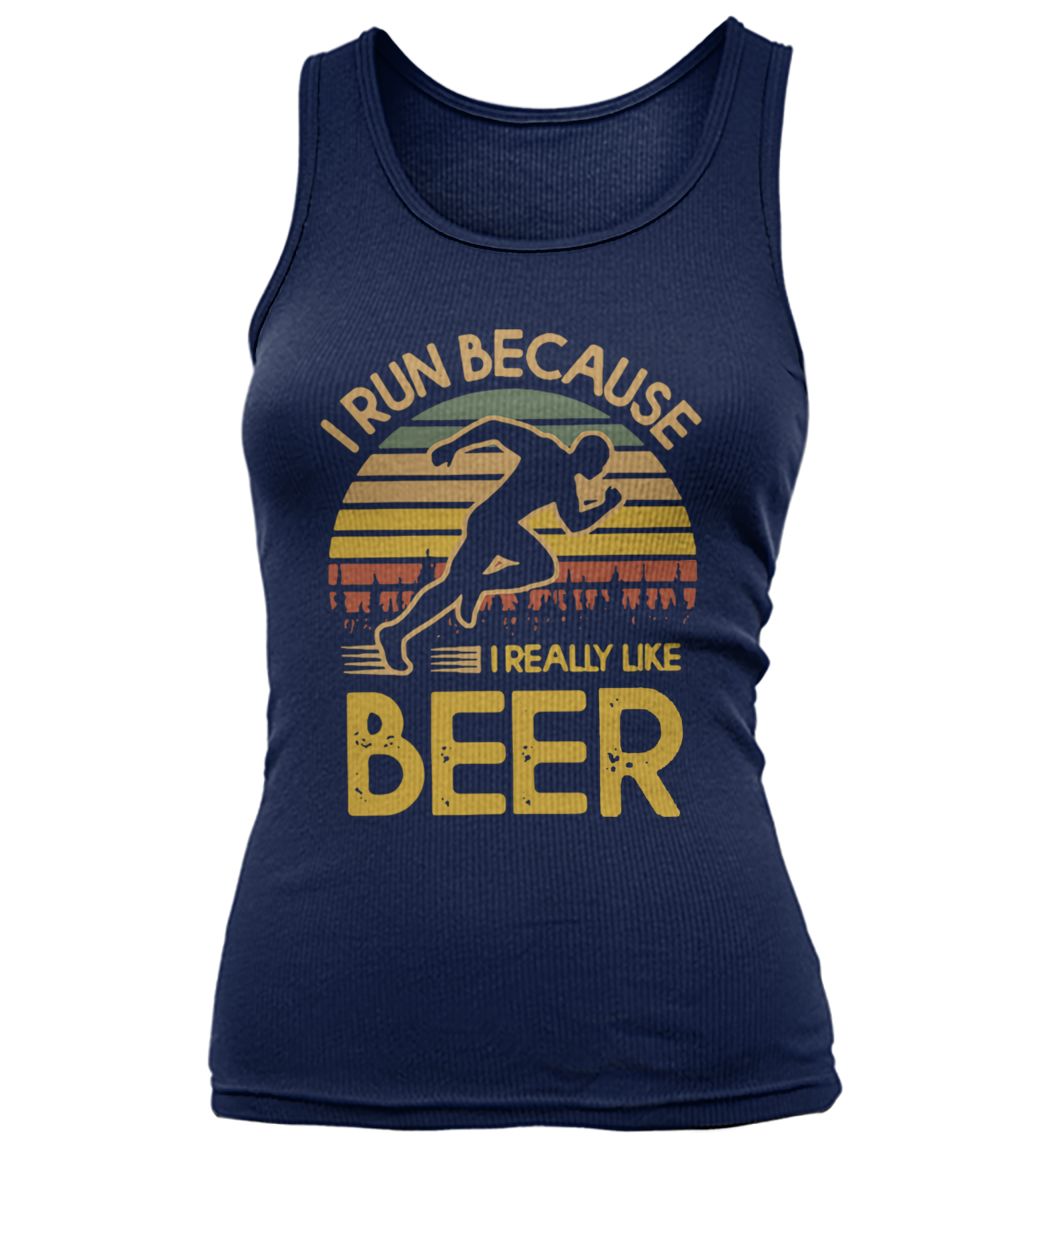 Vintage I run because I really like beer women's tank top